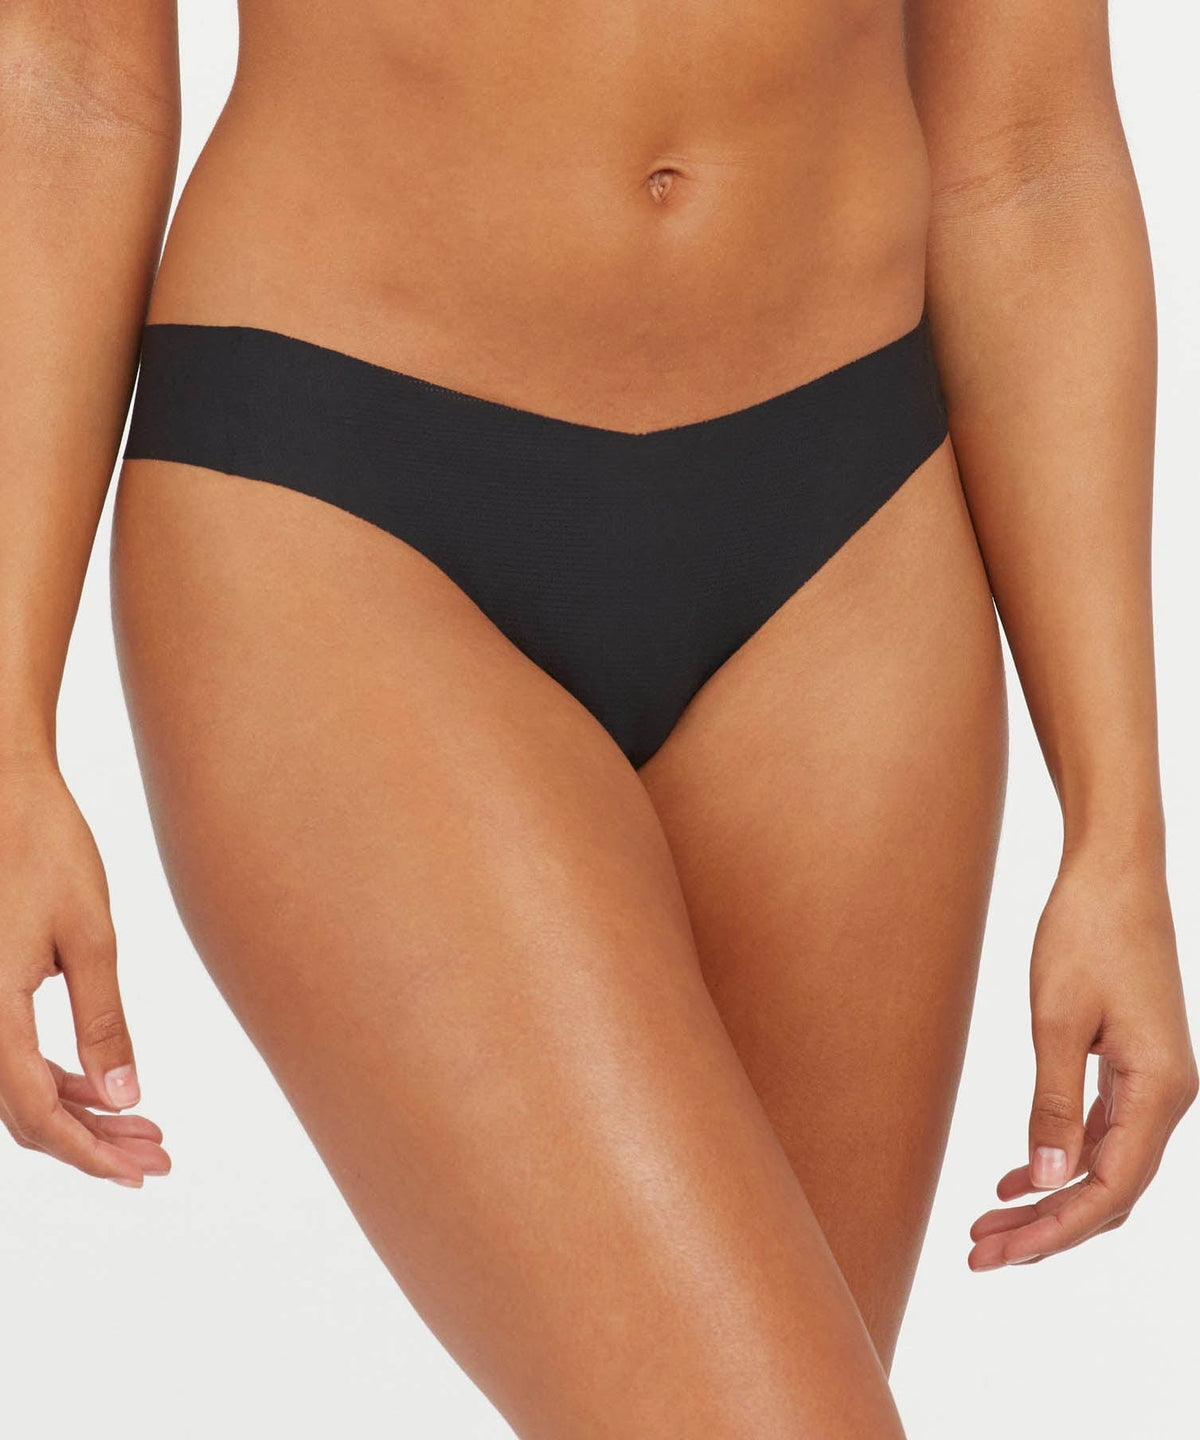 Spanx Under Statement Thong - Black, Naked OR Rose Garden – She She Boutique